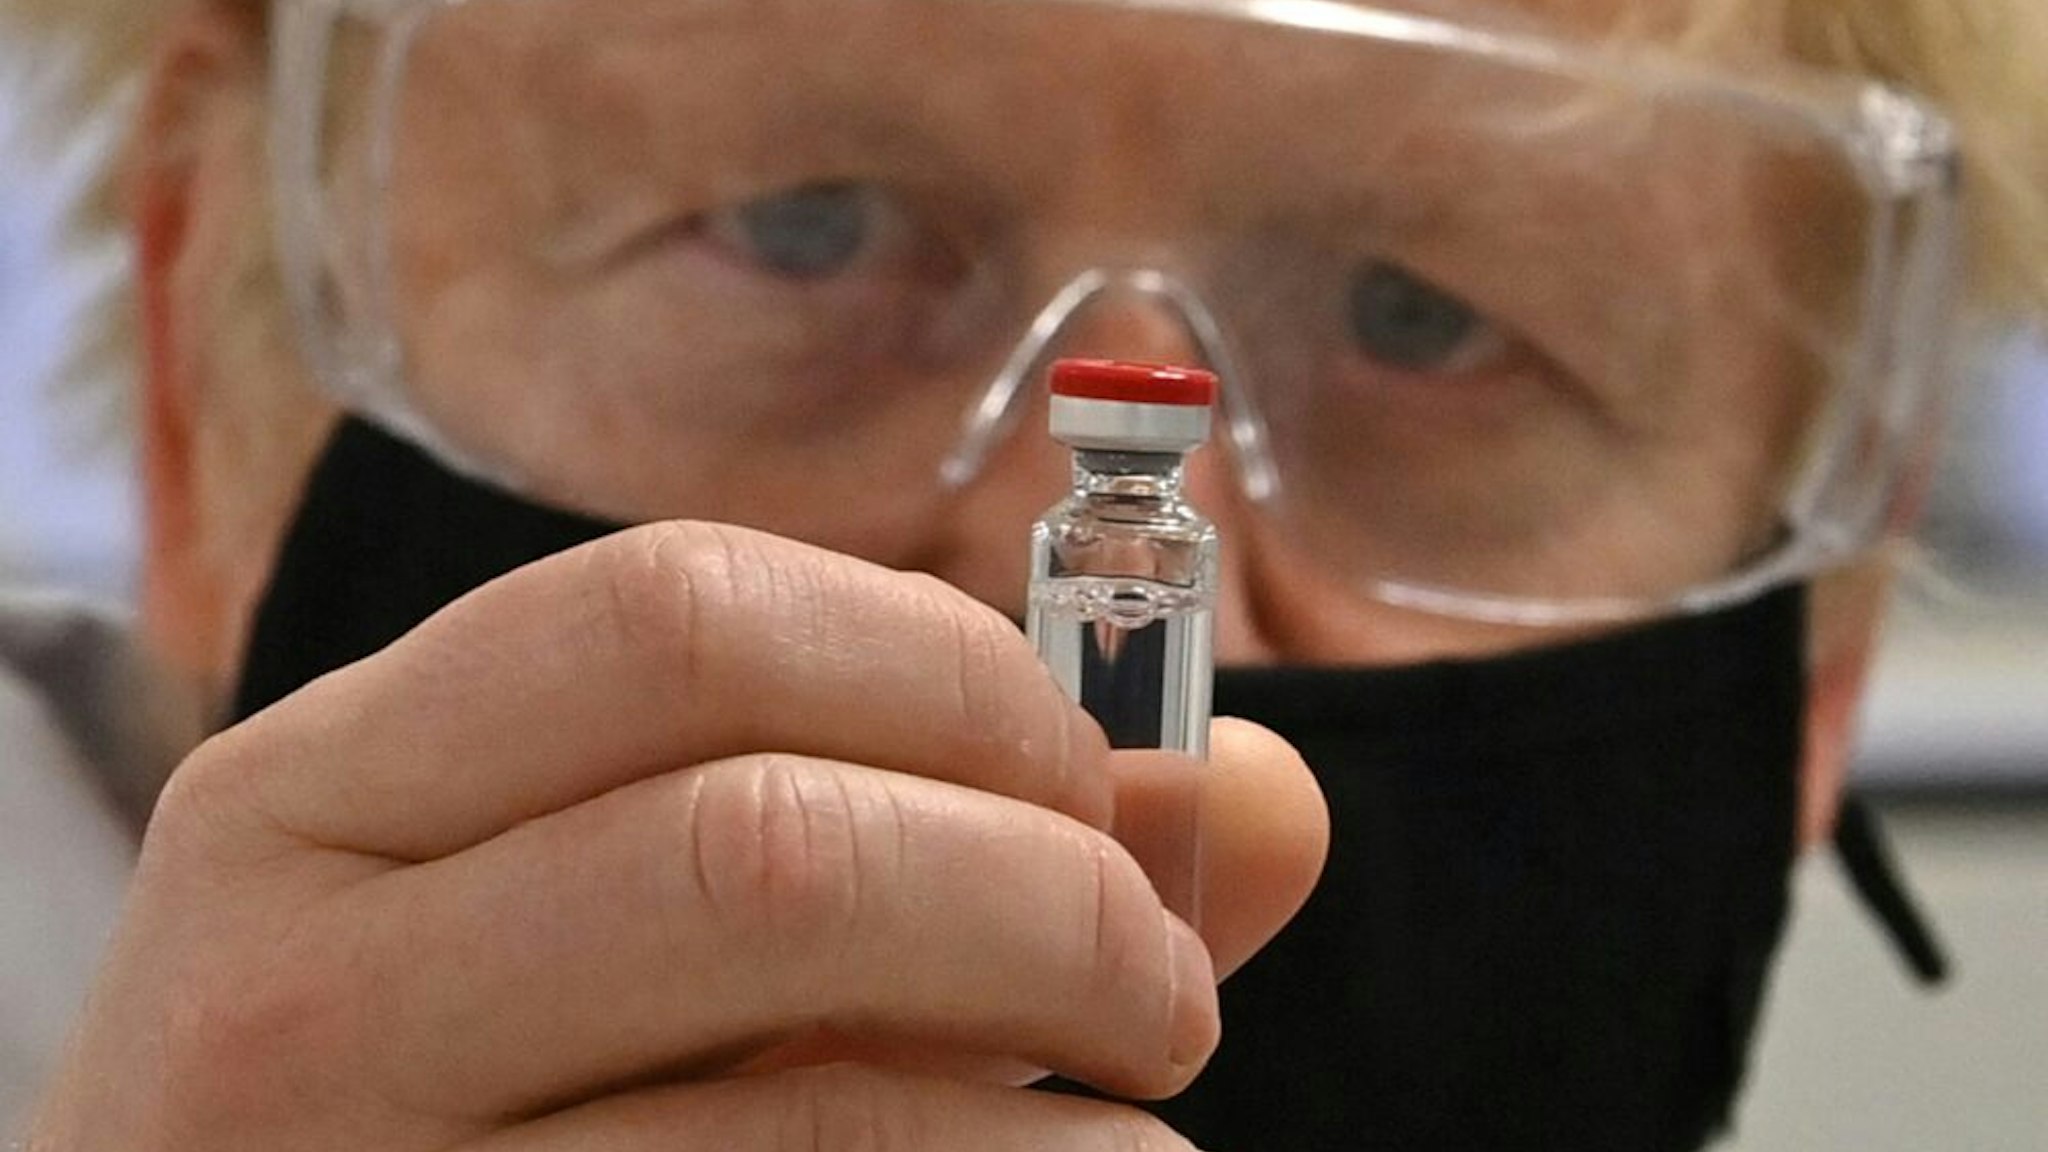 WREXHAM, WALES - NOVEMBER 30: UK Prime Minister Boris Johnson poses for a photograph with a vial of the AstraZeneca/Oxford University COVID-19 candidate vaccine, known as AZD1222, at Wockhardt's pharmaceutical manufacturing facility on November 30, 2020 in Wrexham, Wales. The UK government announced a deal in August with global pharmaceutical and biotechnology company Wockhardt, to increase capacity in a crucial part of the manufacturing process for Covid-19 vaccines. Britain has been Europe's worst-hit country during the pandemic, recording more than 57,000 deaths from some 1.6 million cases.